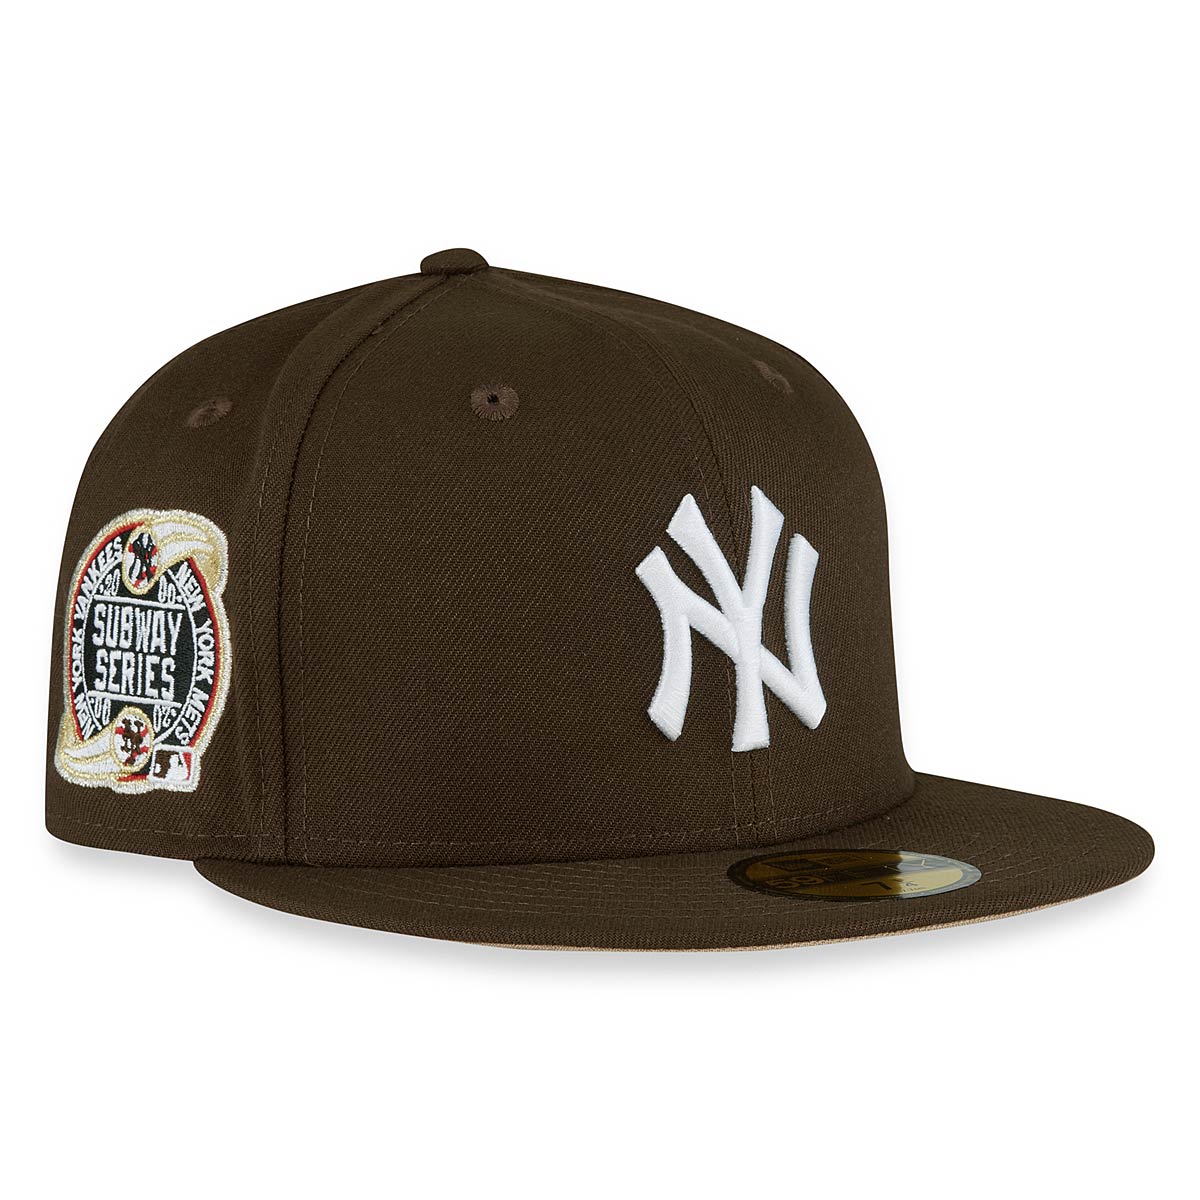 Buy MLB NEW YORK YANKEES SUBWAY SERIES PATCH 59FIFTY CAP for EUR